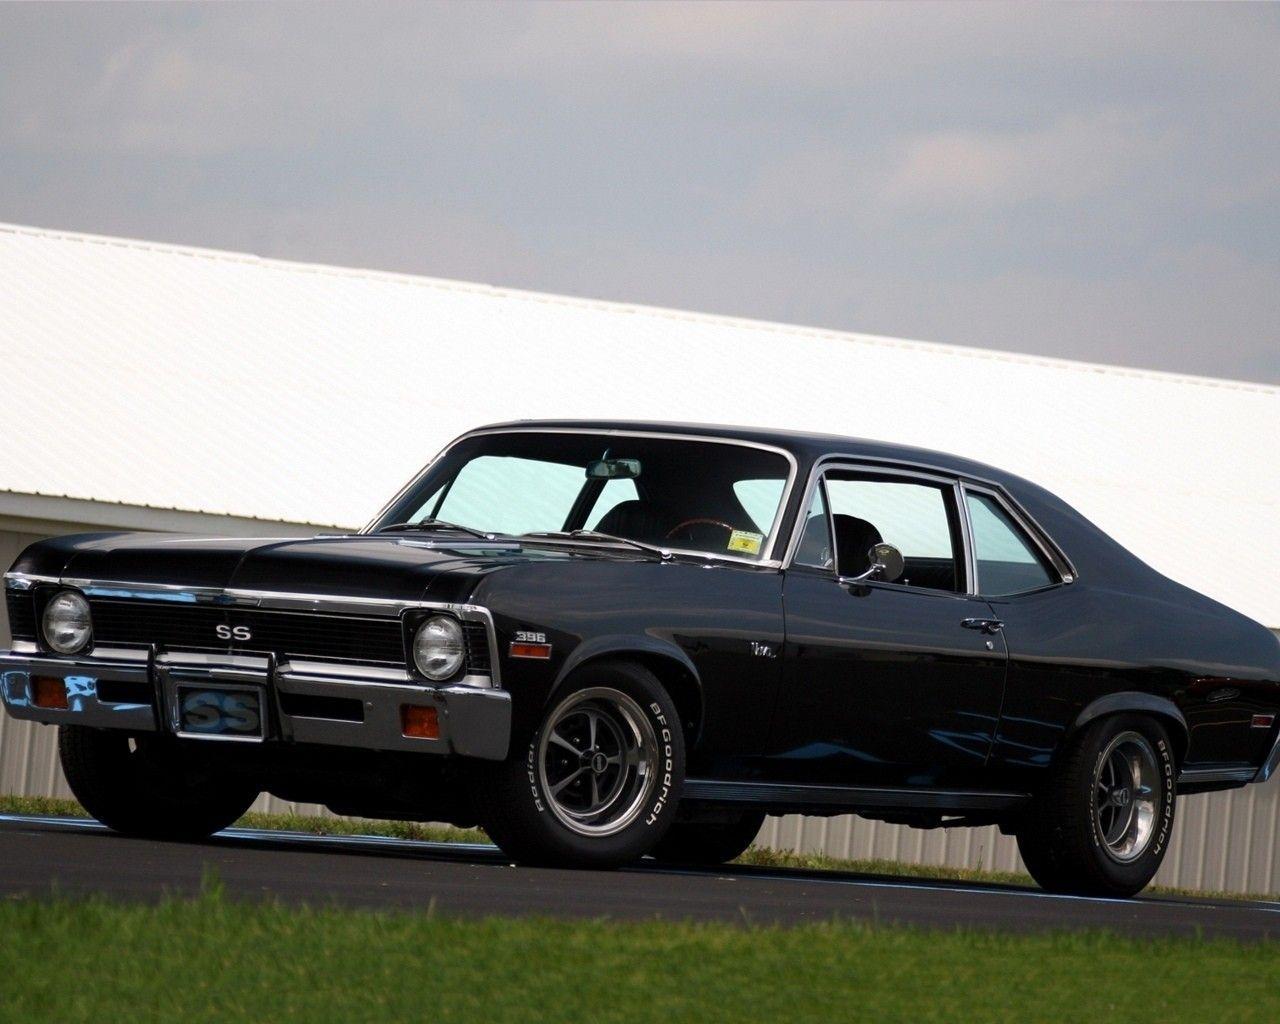 Best image about Opala SS / Chevrolet SS